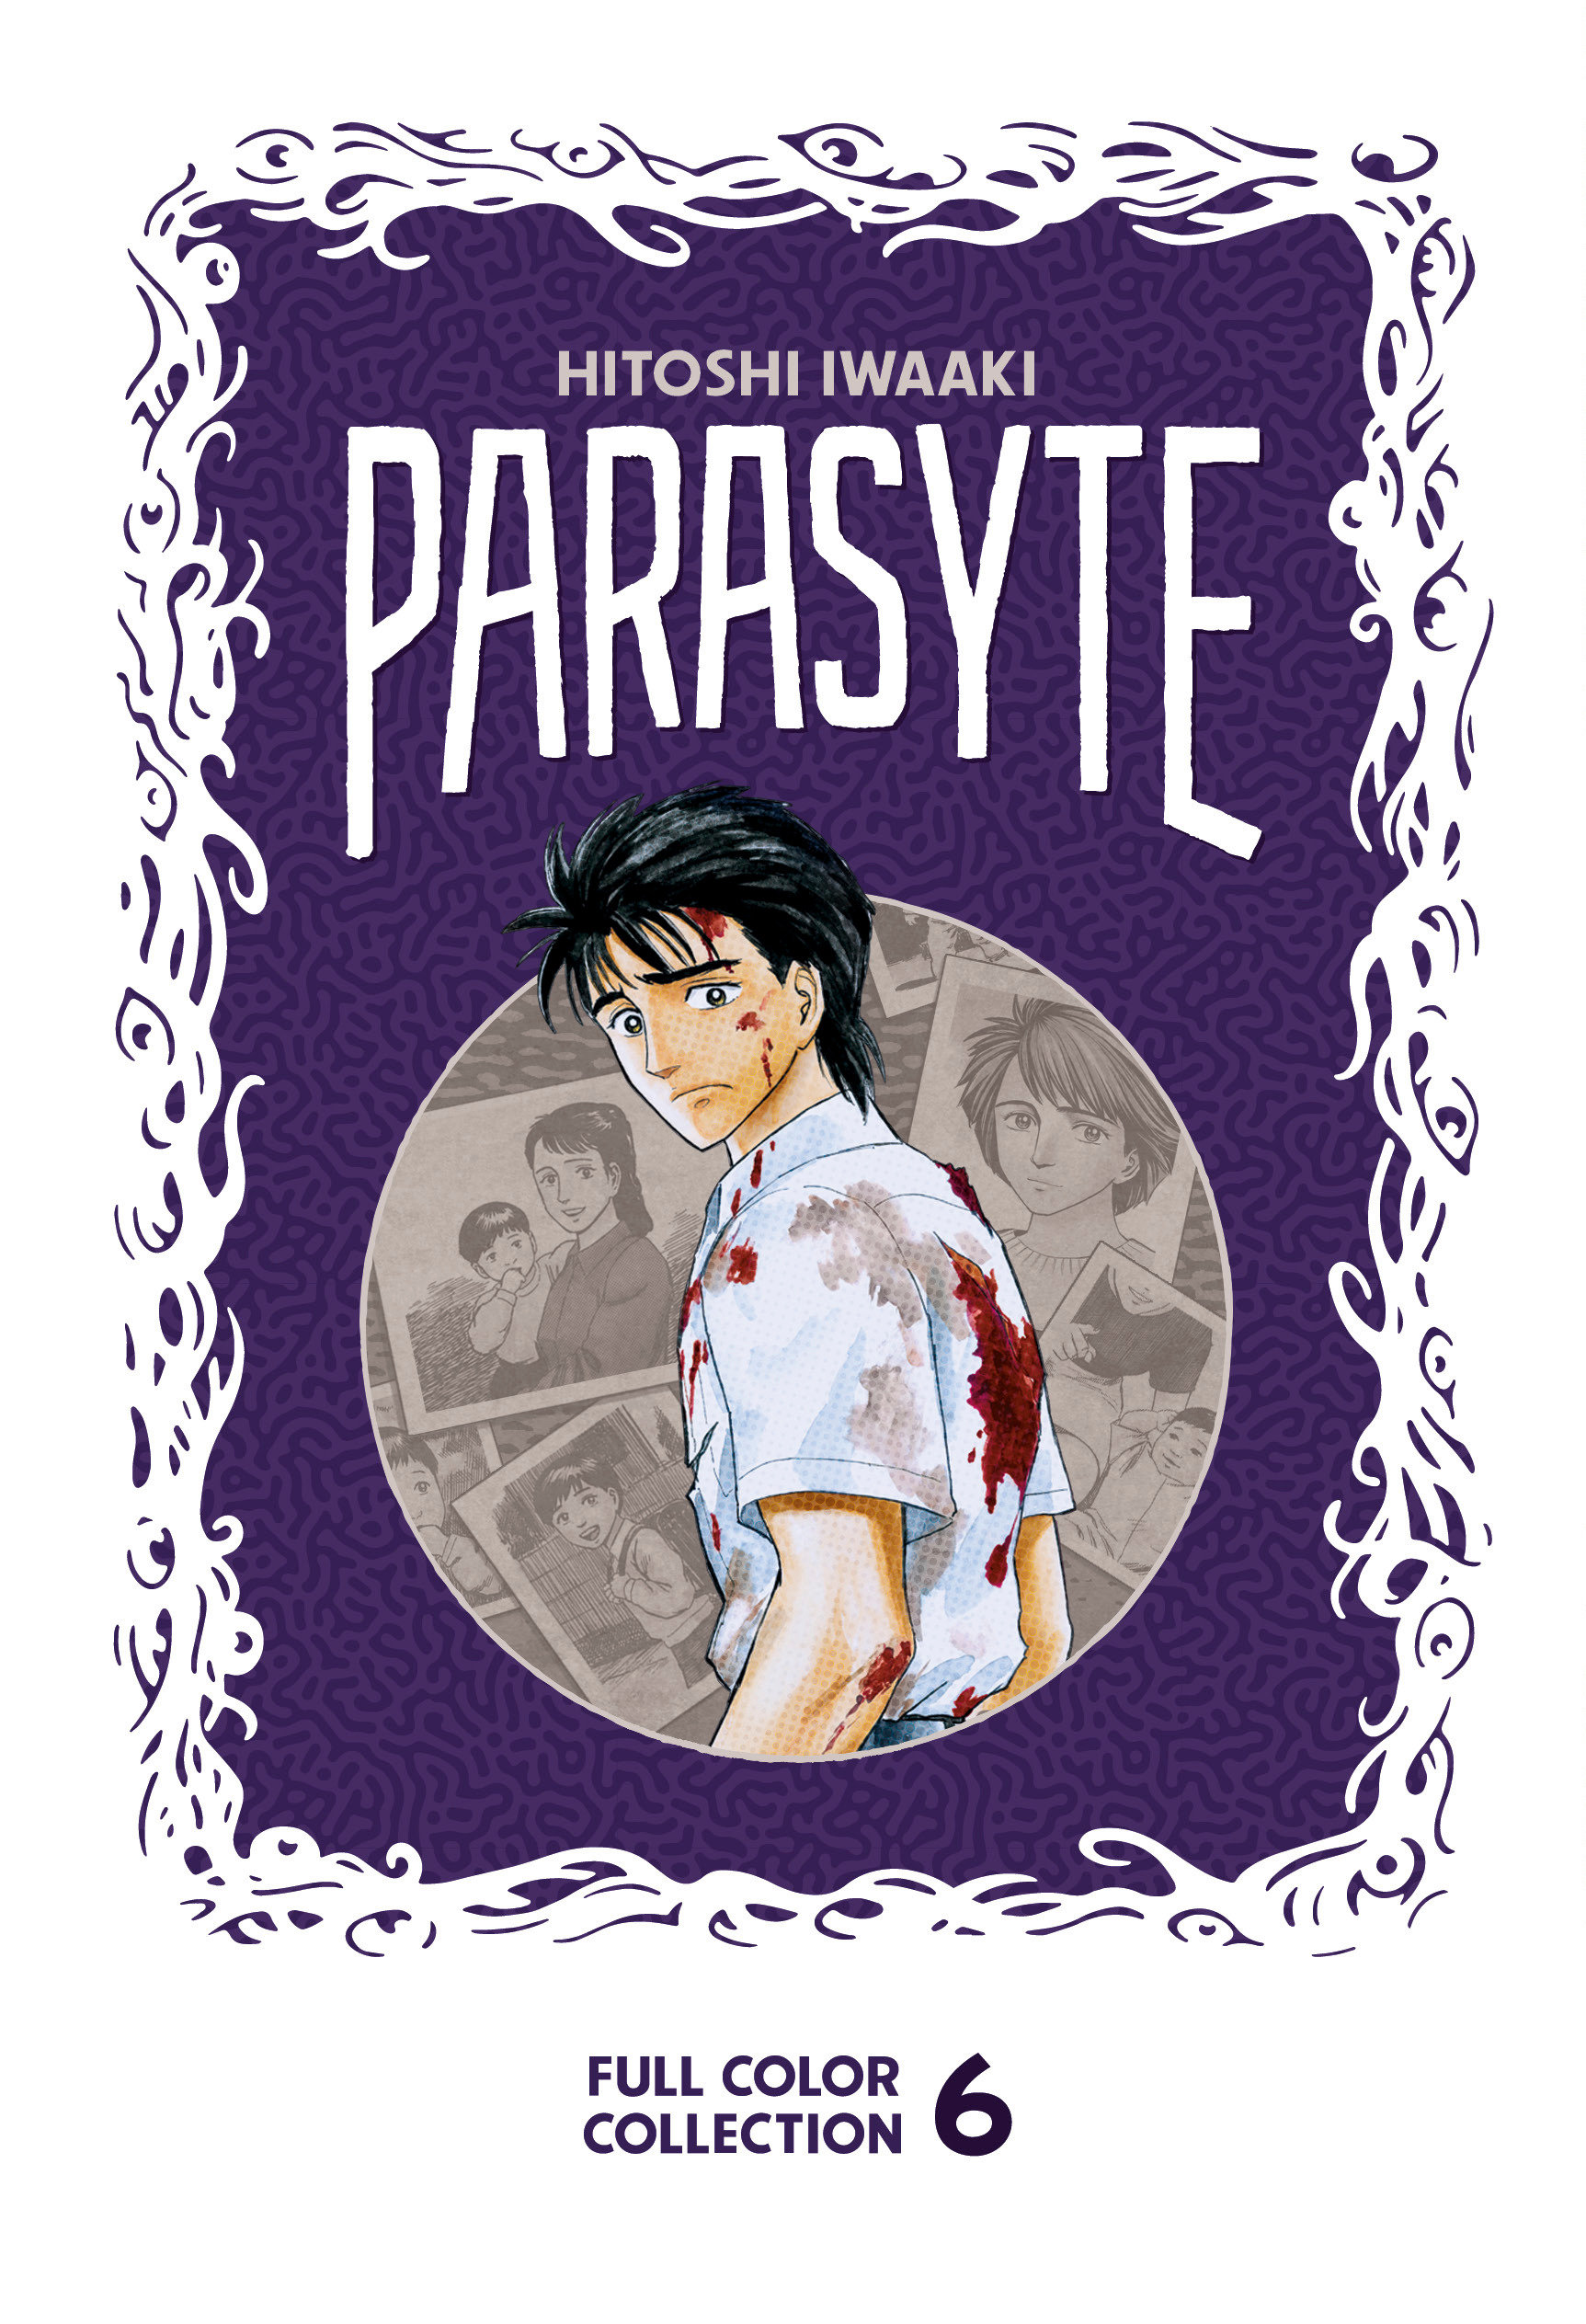 Parasyte Full Color Collection Manga Hardcover 6